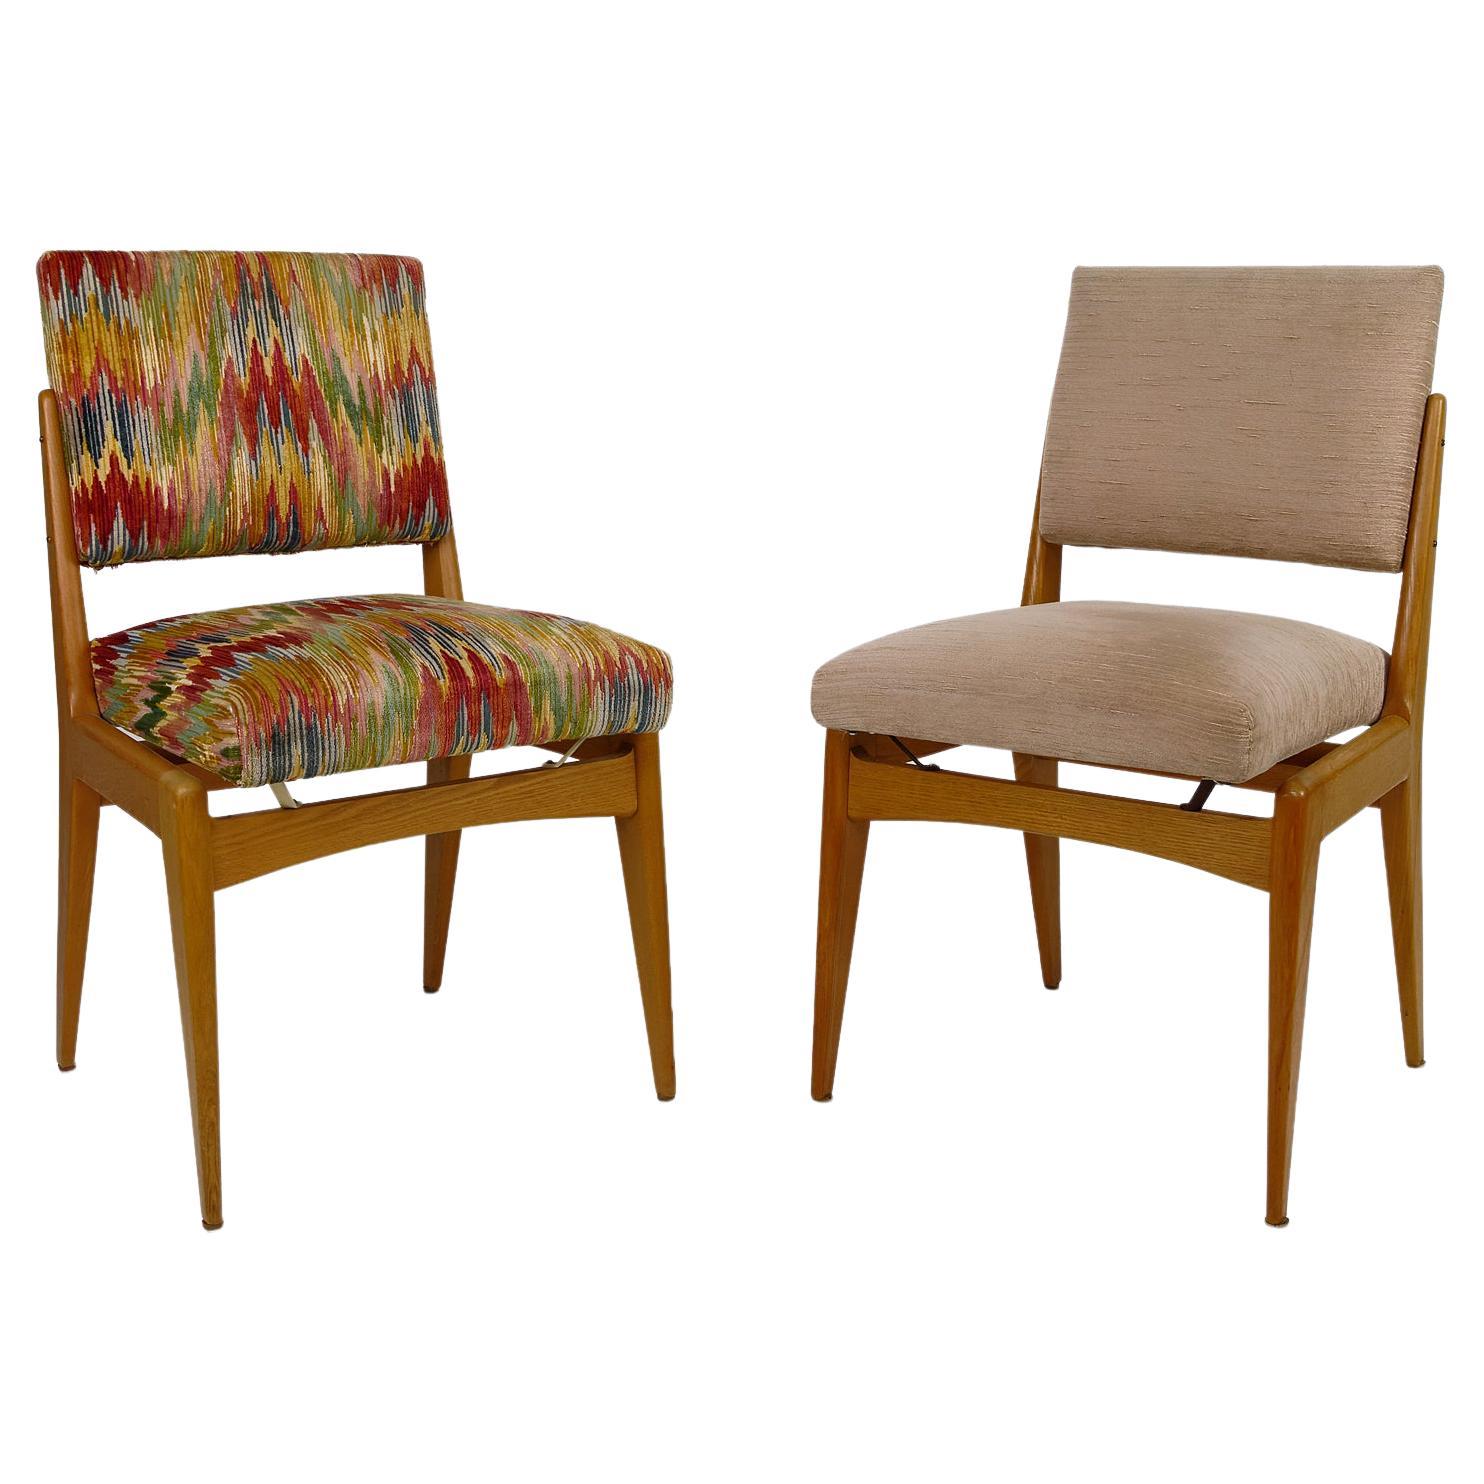 Pair of Mid-Century Modern Chairs, France, circa 1950